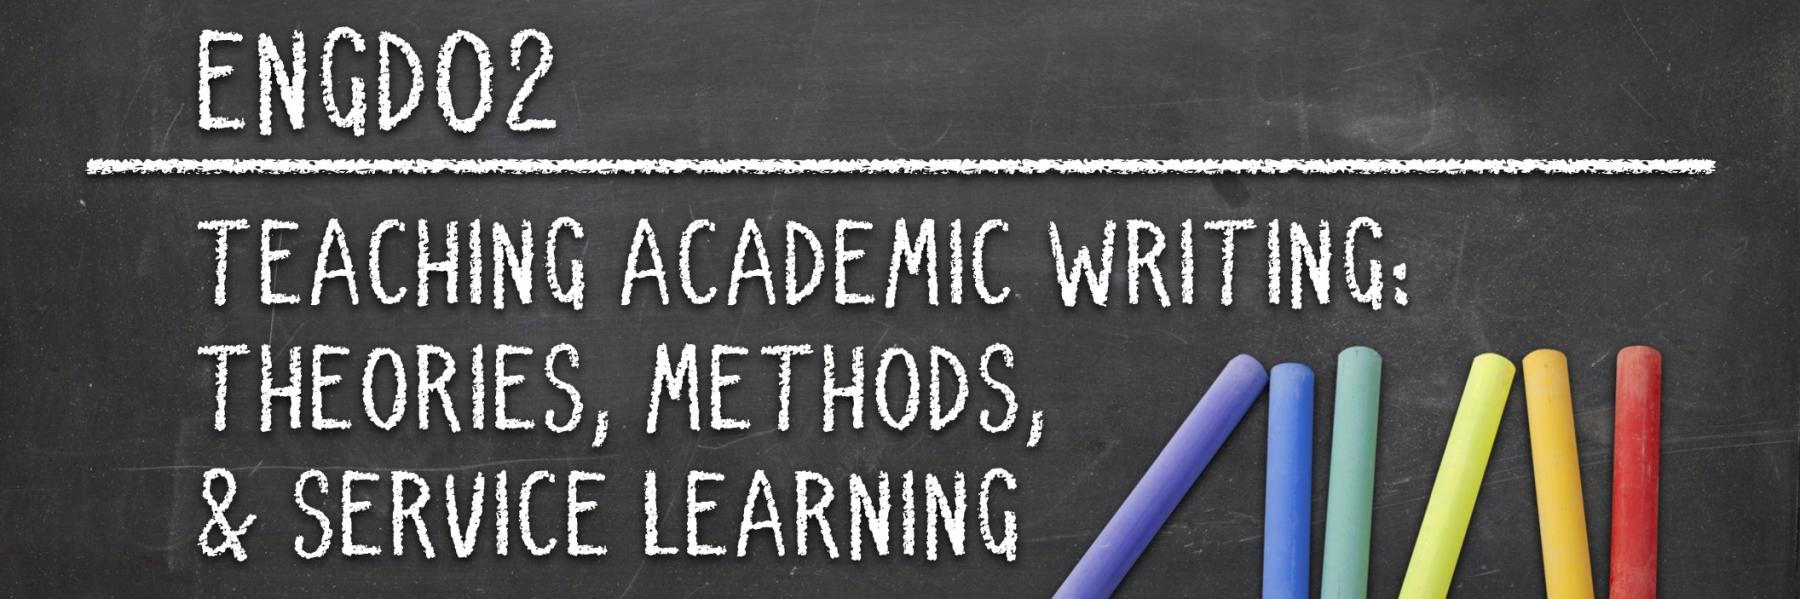 ENGD02: Teaching Academic Writing: Theories, Methods, and Service Learning 